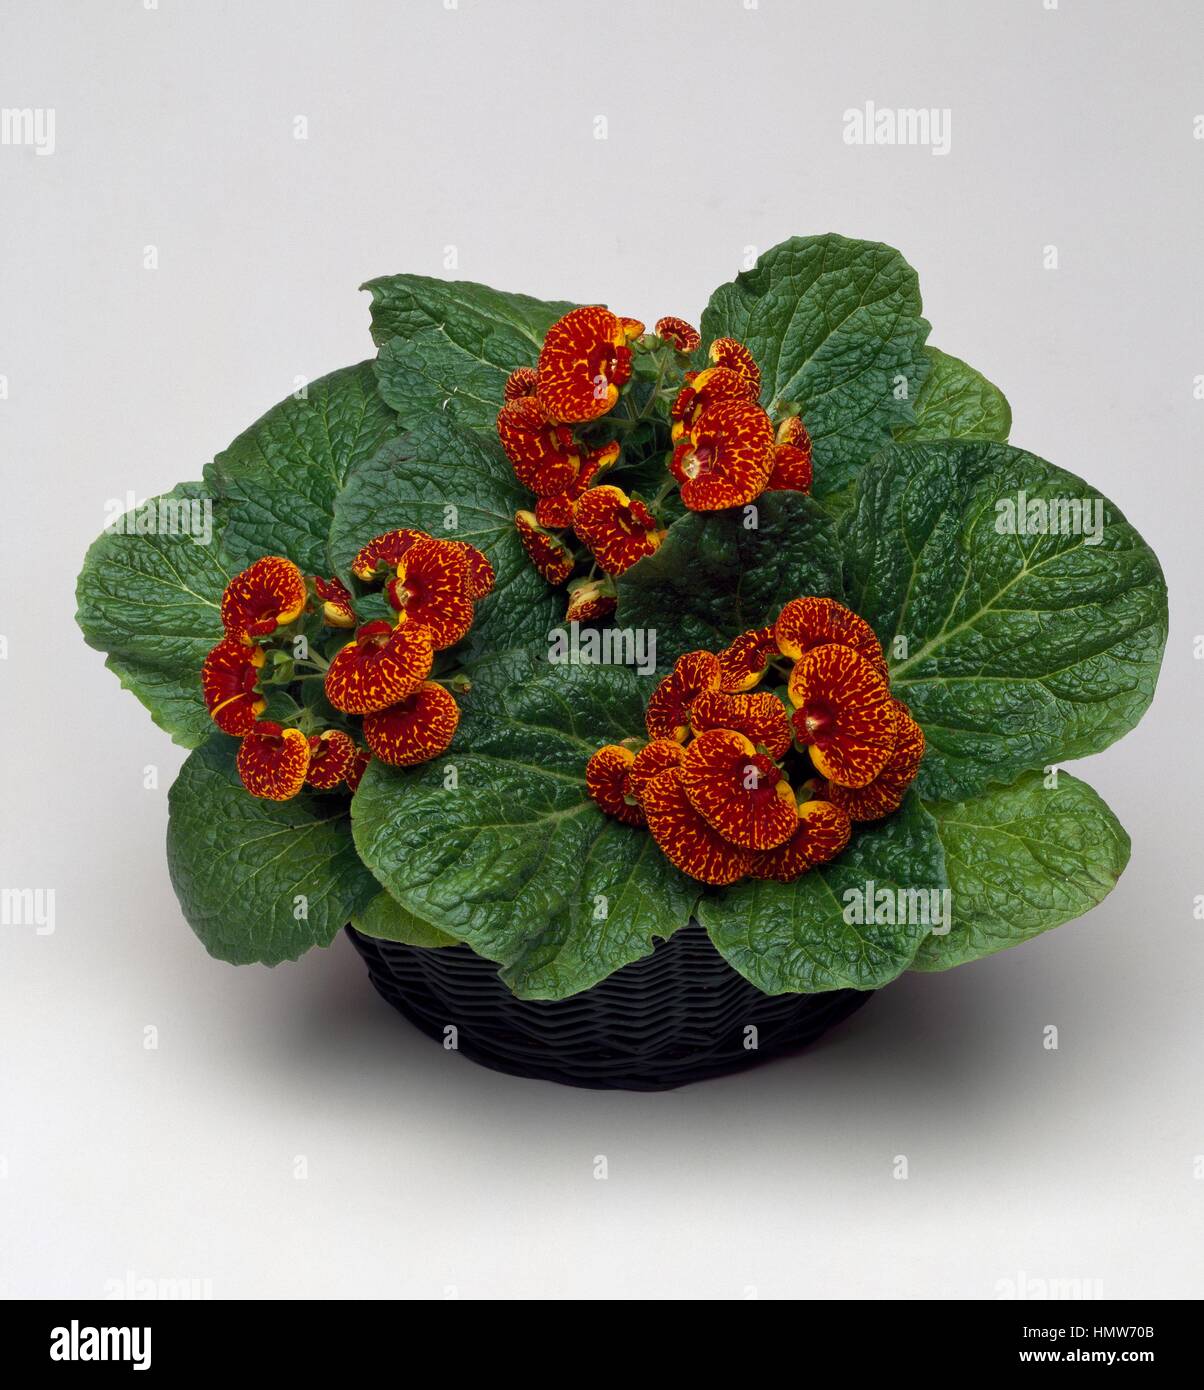 Lady's purse, slipper flower (Calceolaria sp), Scrophulariaceae. Stock Photo